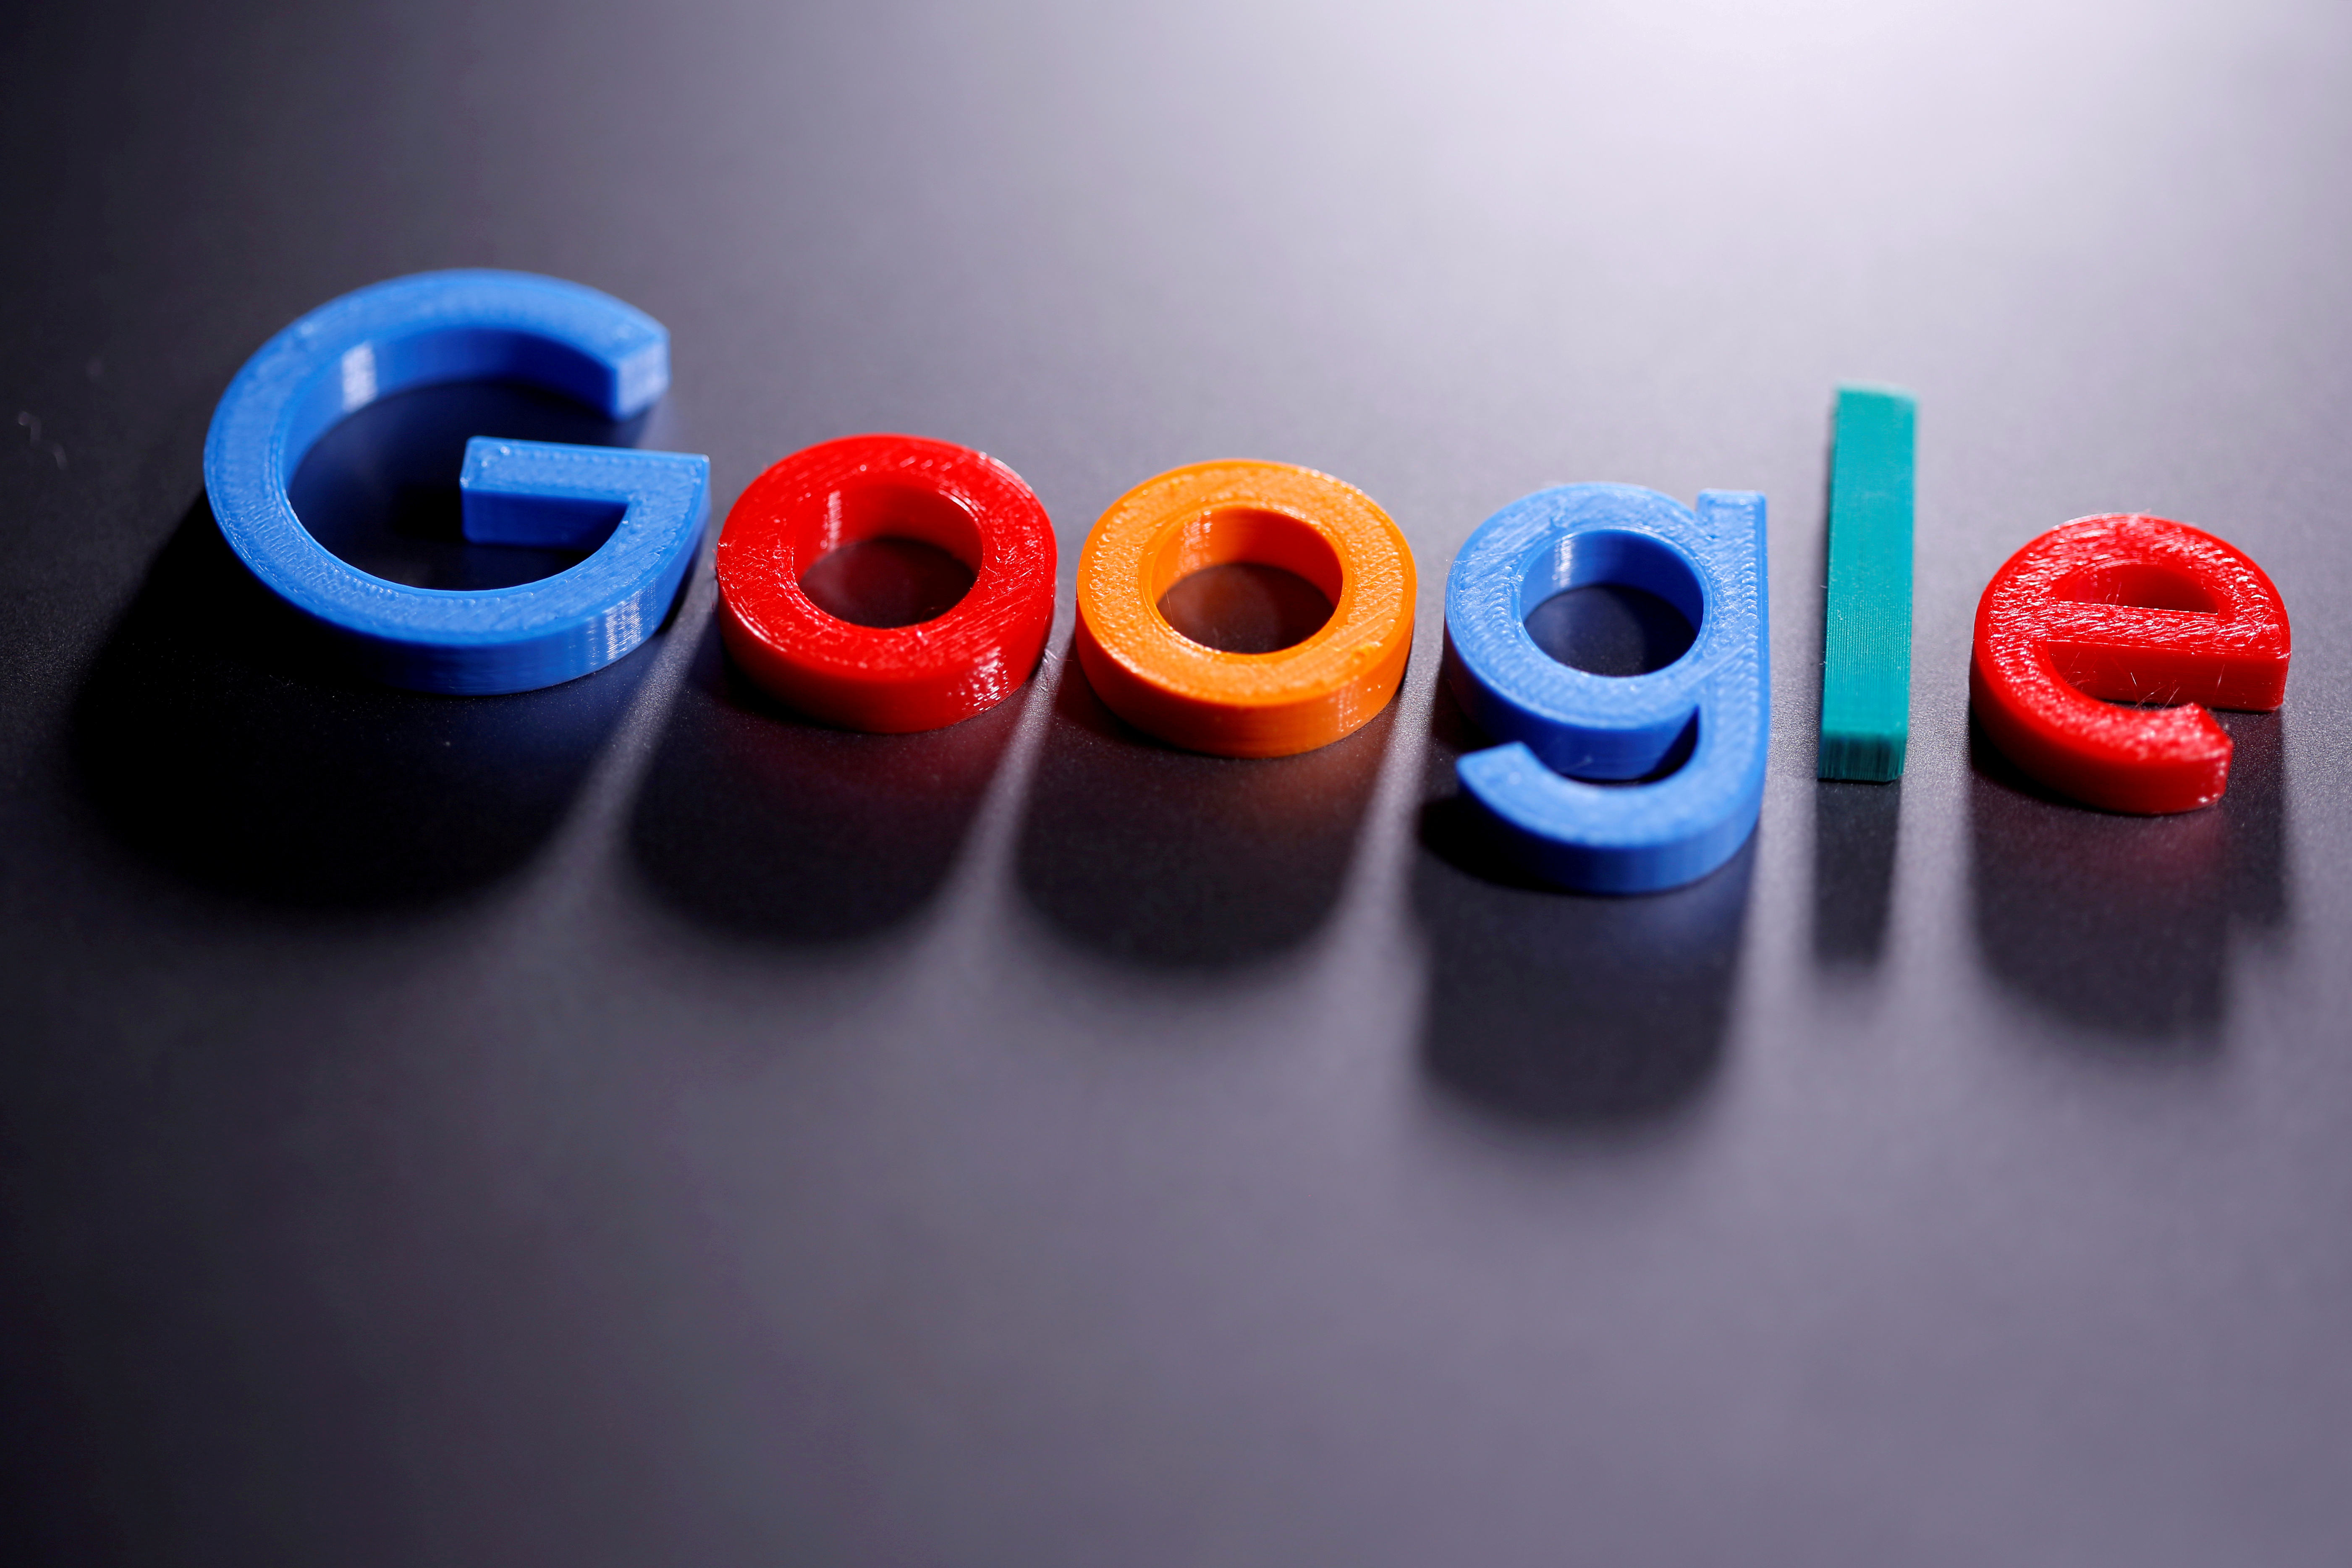 A 3D printed Google logo is seen in this illustration taken April 12, 2020. REUTERS/Dado Ruvic/Illustration/File Photo